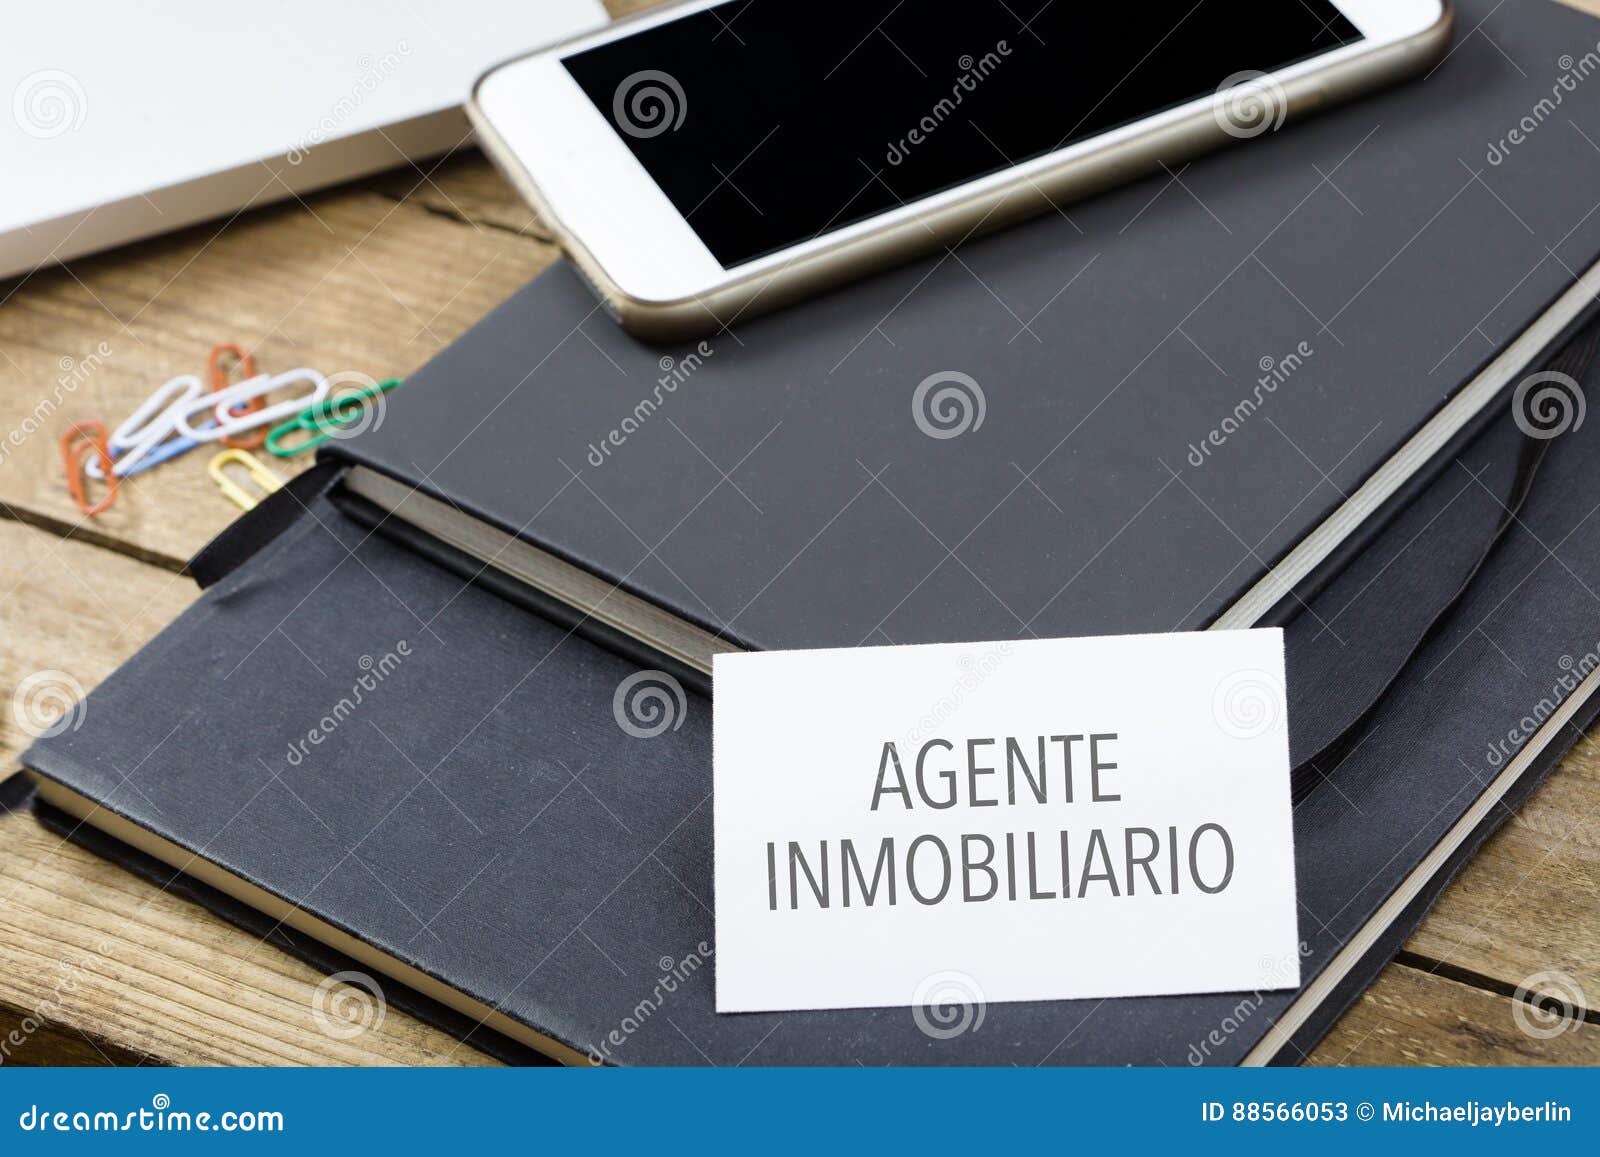 agente inmobiliario, spanish text for realtor business card on o